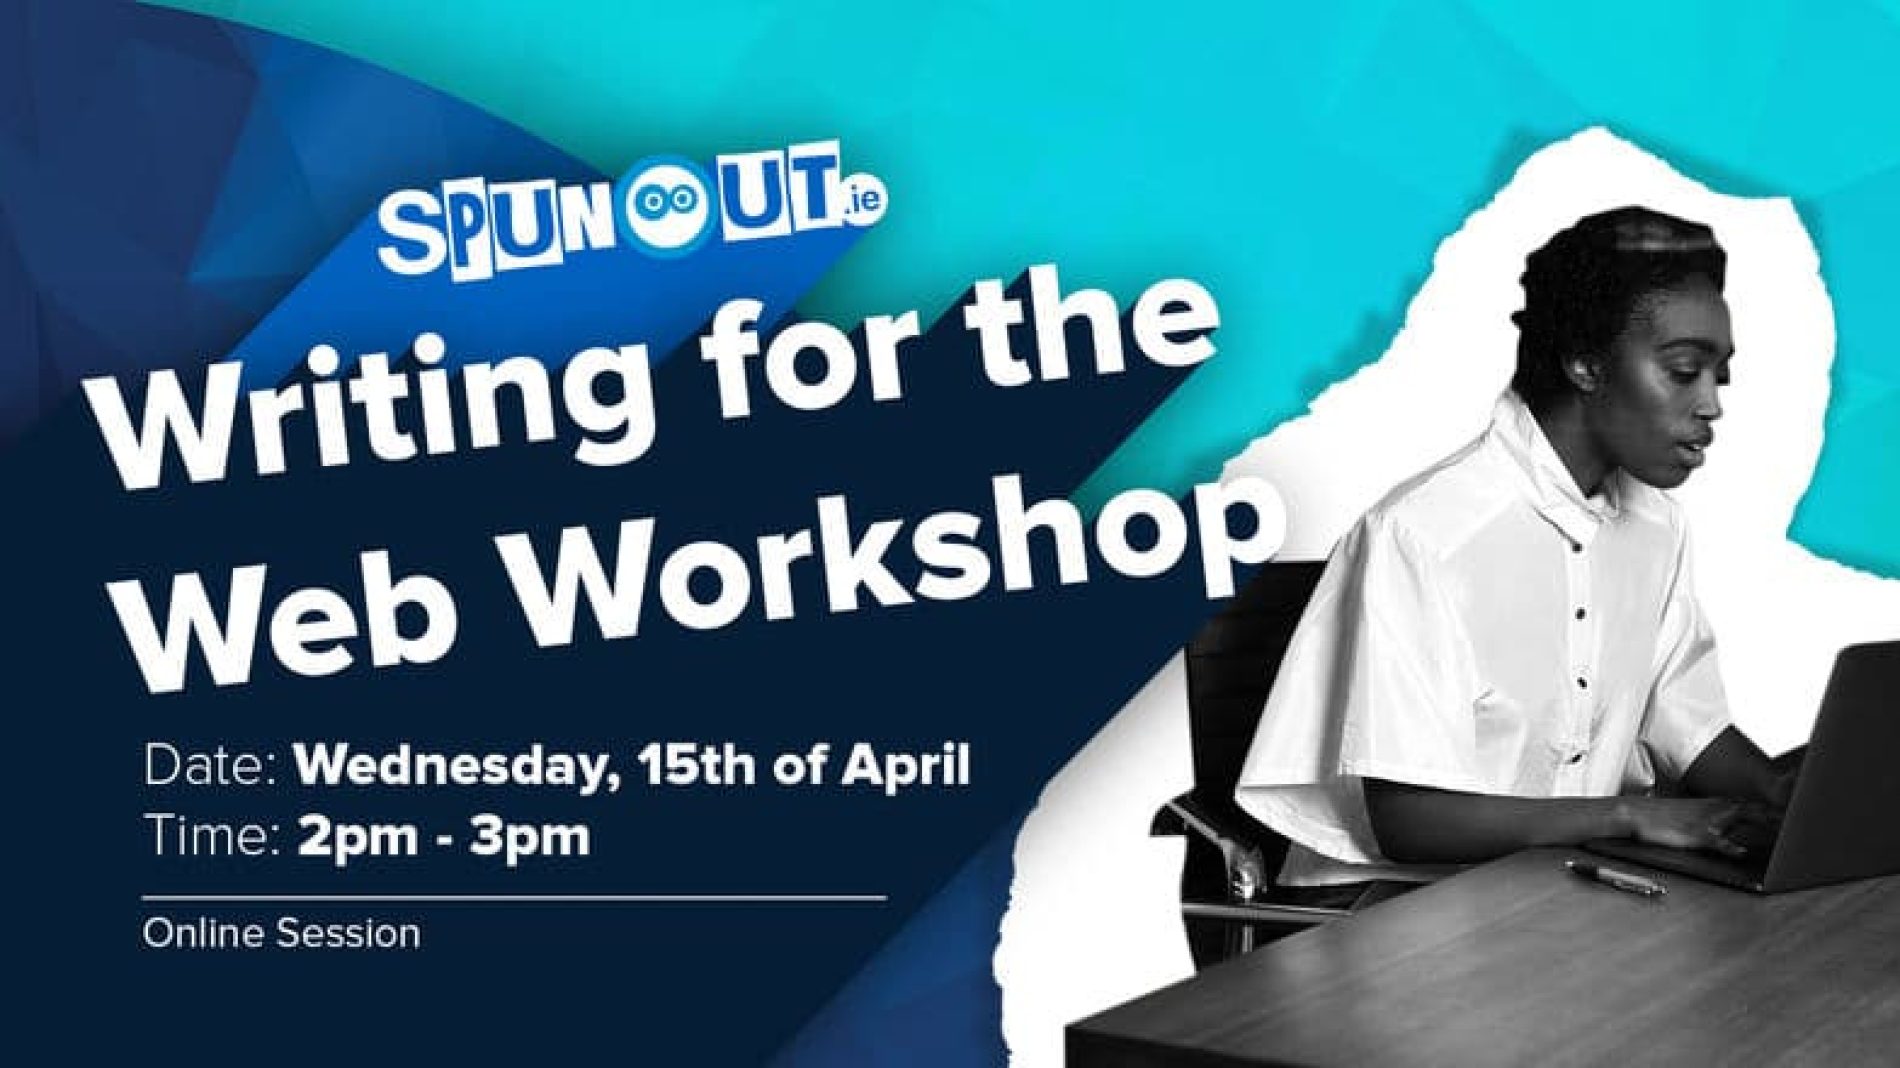 Sign up now for SpunOut.ie's 'Writing for the Web' workshop